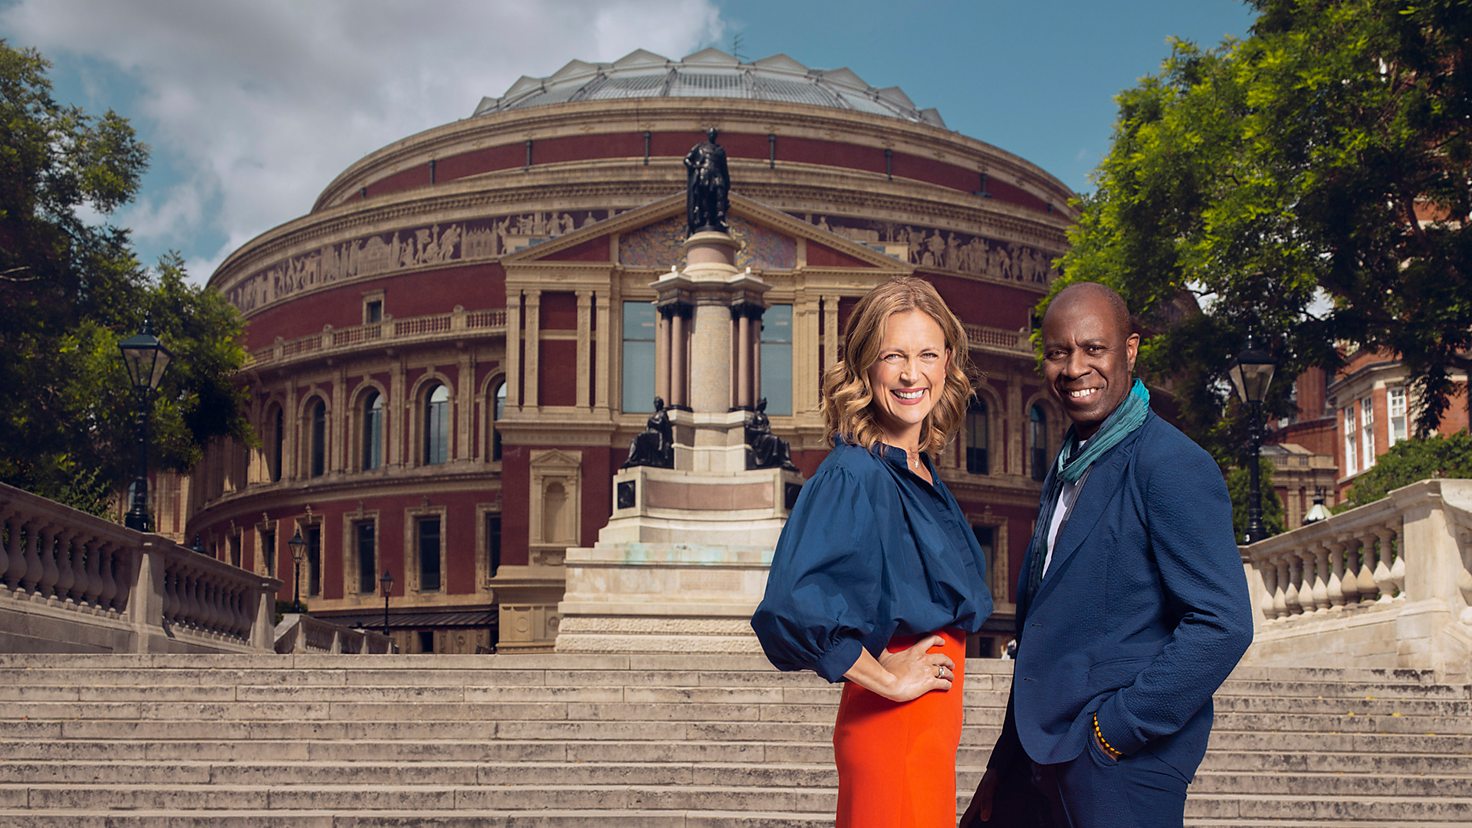 BBC Proms Reports Record-Breaking Online Ticket Sales